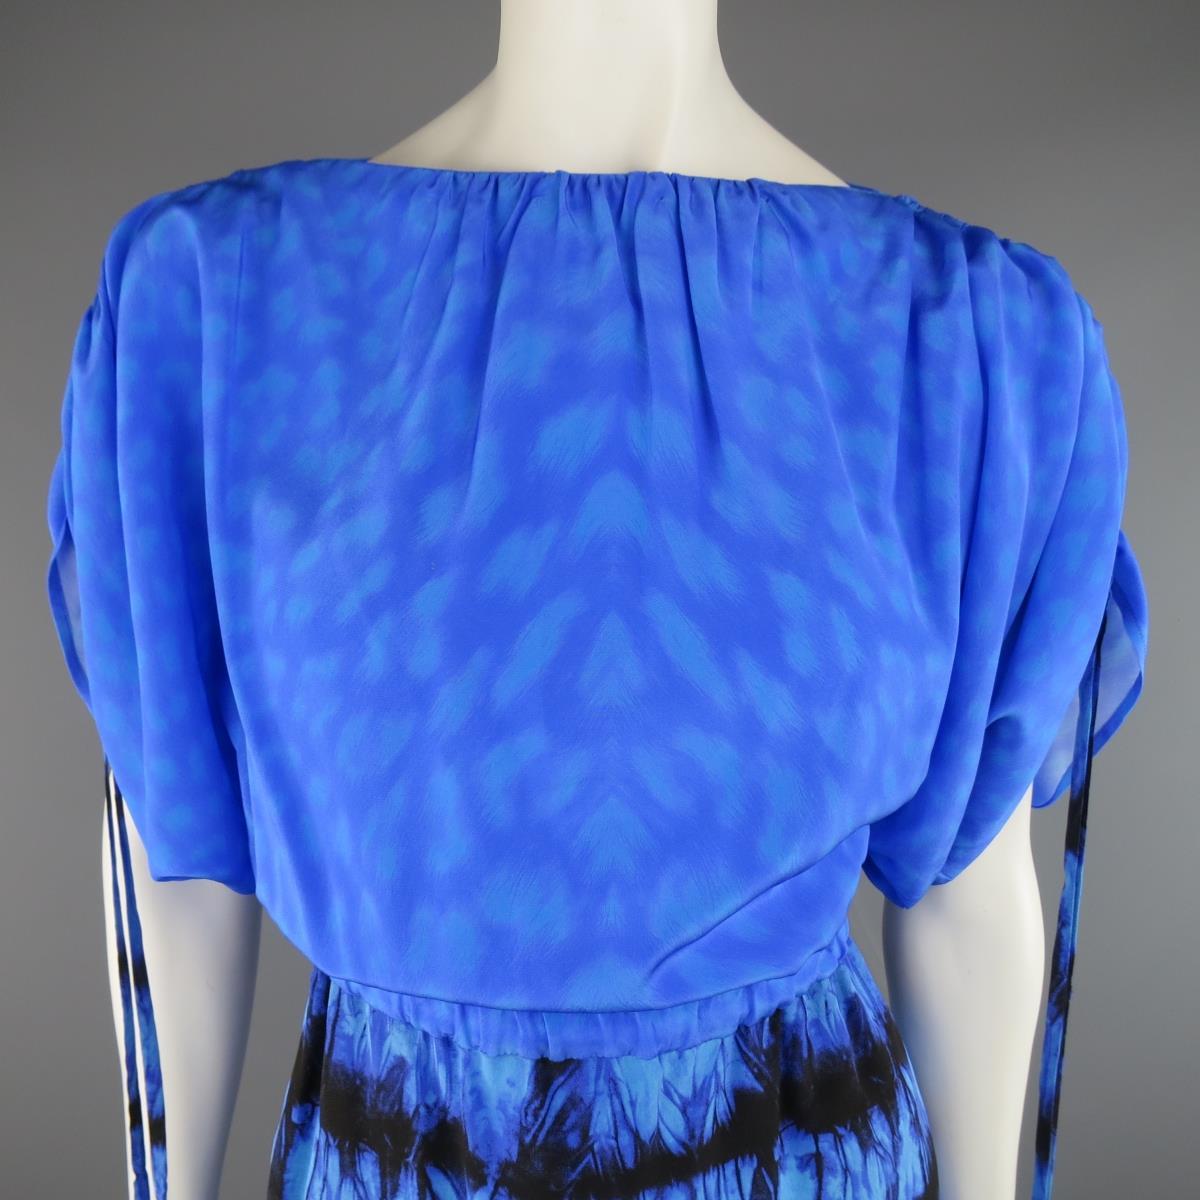 ROBERTO CAVALLI mini dress comes in a light weight silk crepe featuring a blue cheetah blousey fit top with gathered boat neck and drawstring bat wing sleeves, elastic waistband, and black tie die print mini skirt. Made in Italy.Excellent Pre-Owned